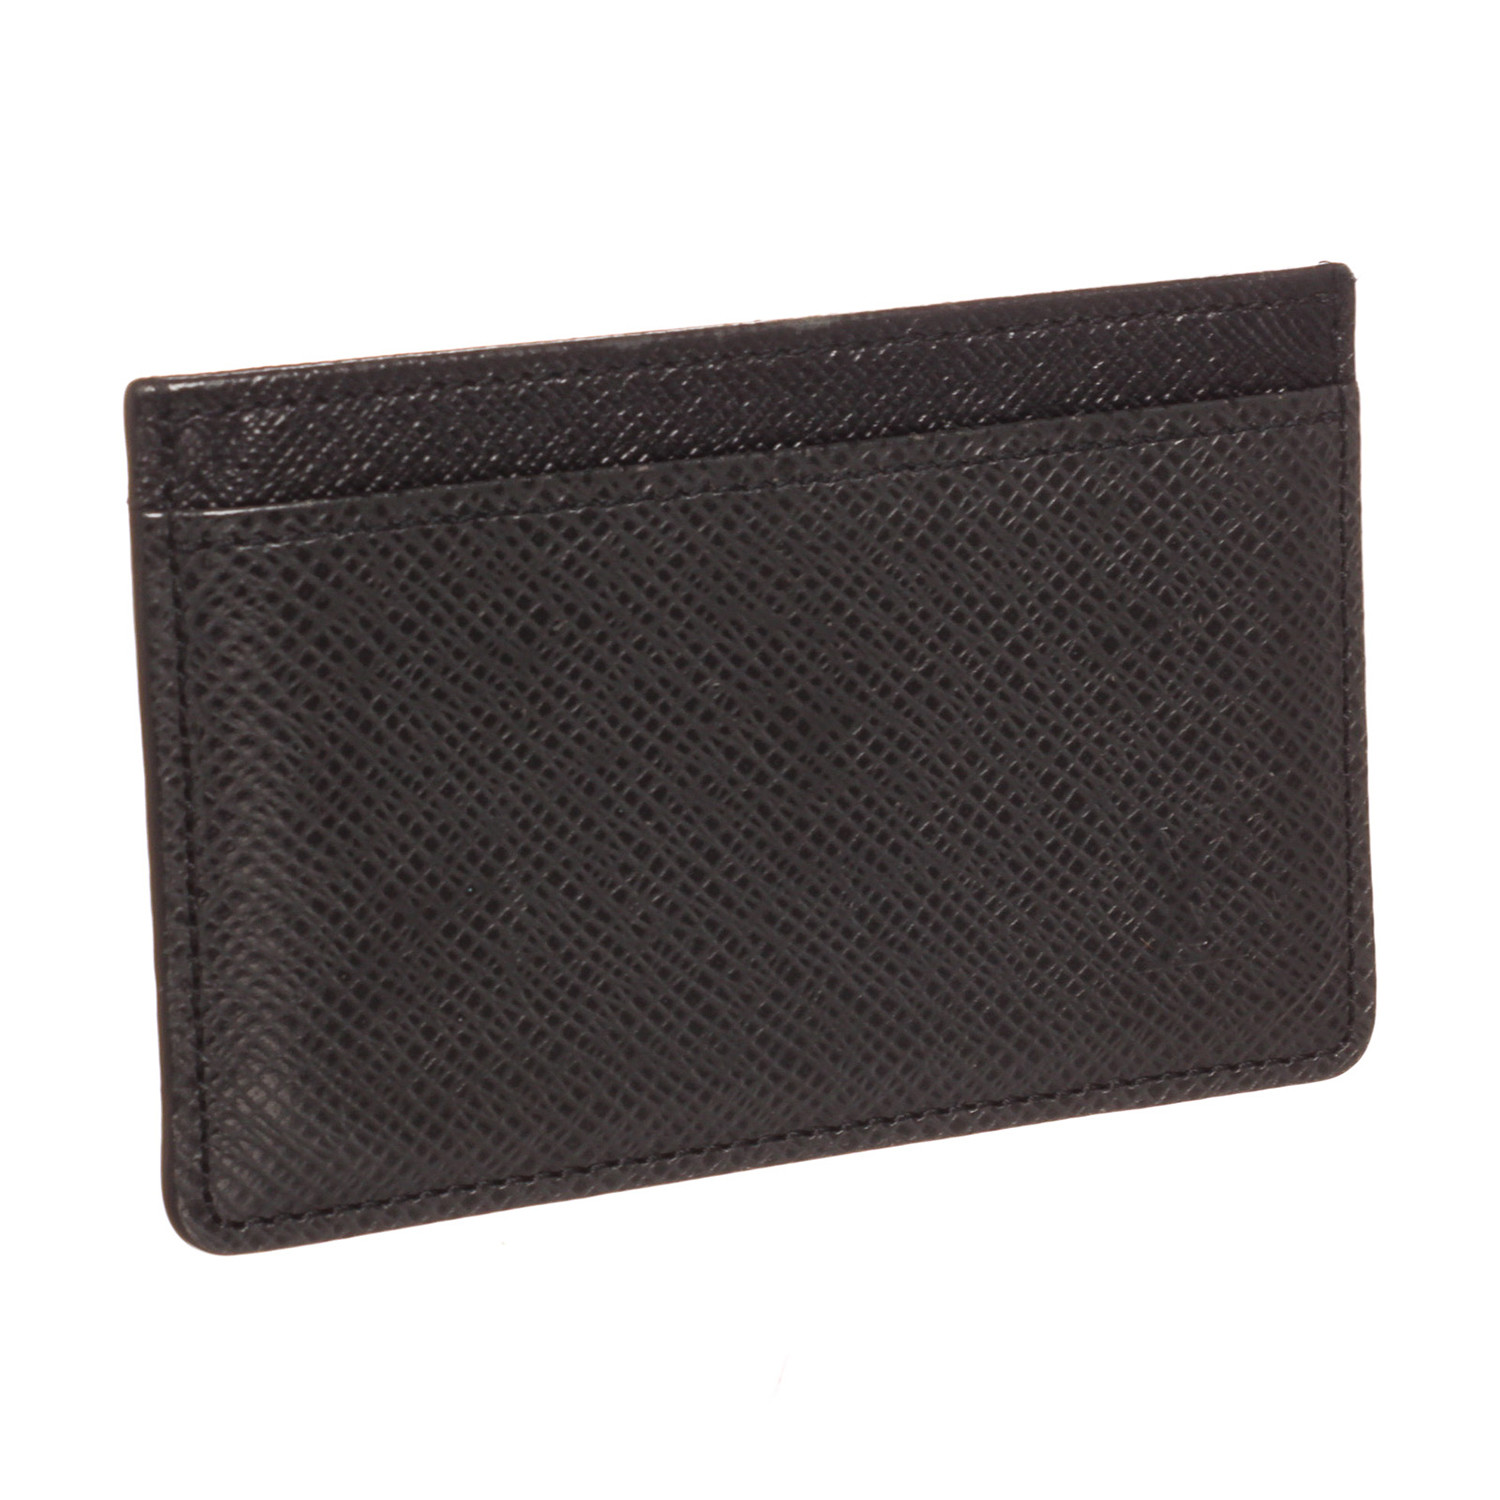 Louis Vuitton // 2004 Black Taiga Leather Card Holder Wallet // SP0044 // Pre-Owned - Vintage ...